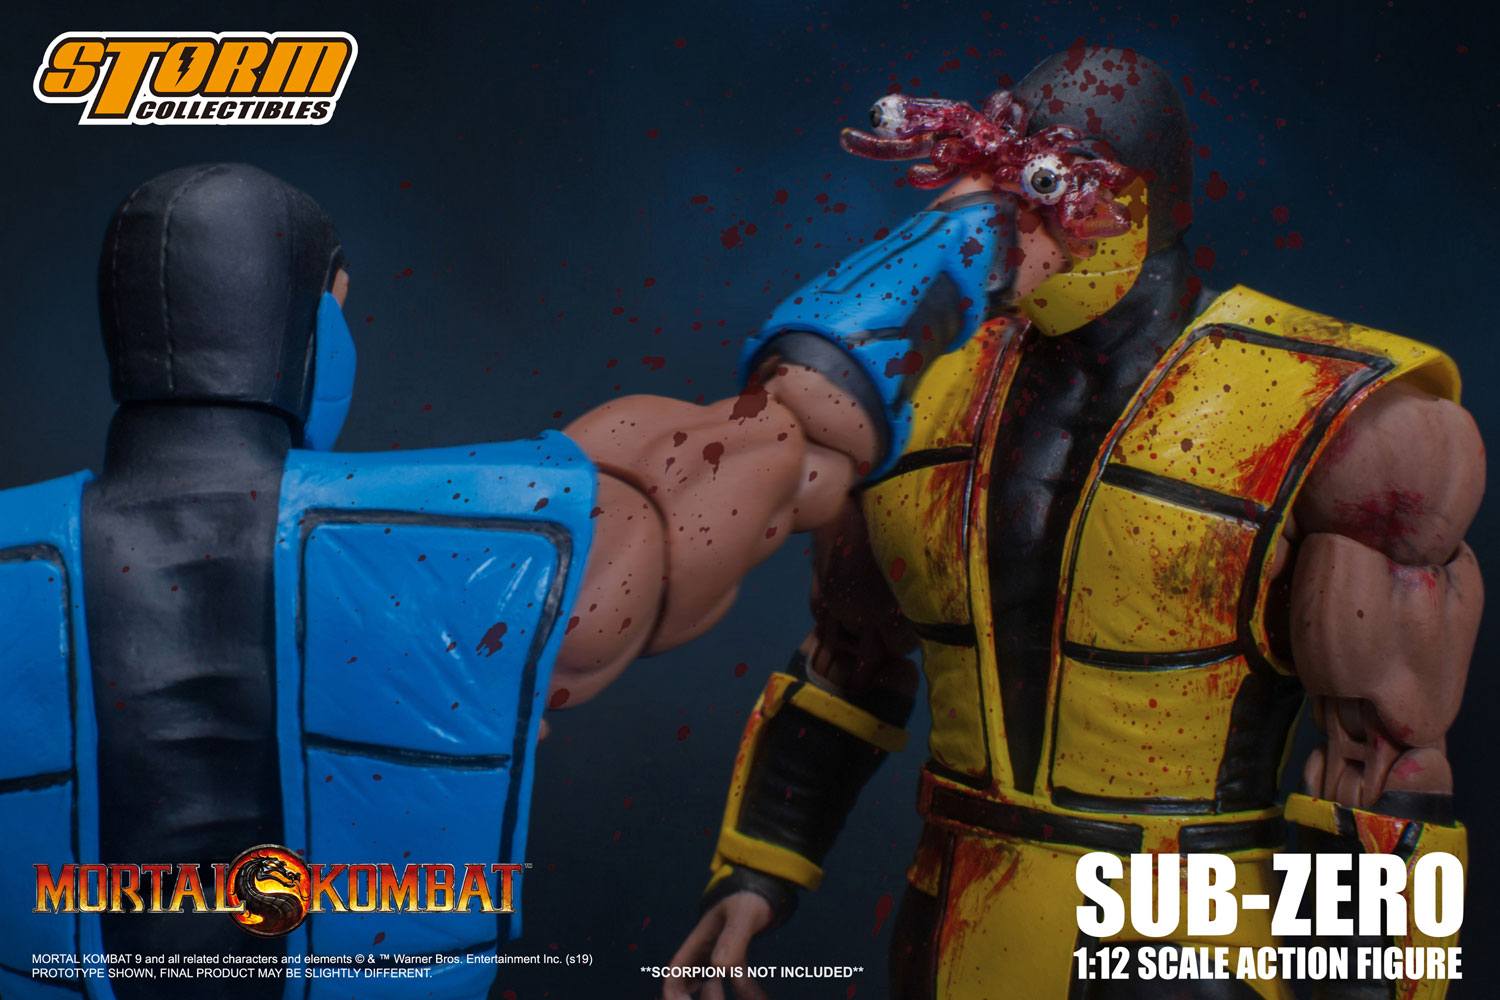 storm collectibles scorpion reissue